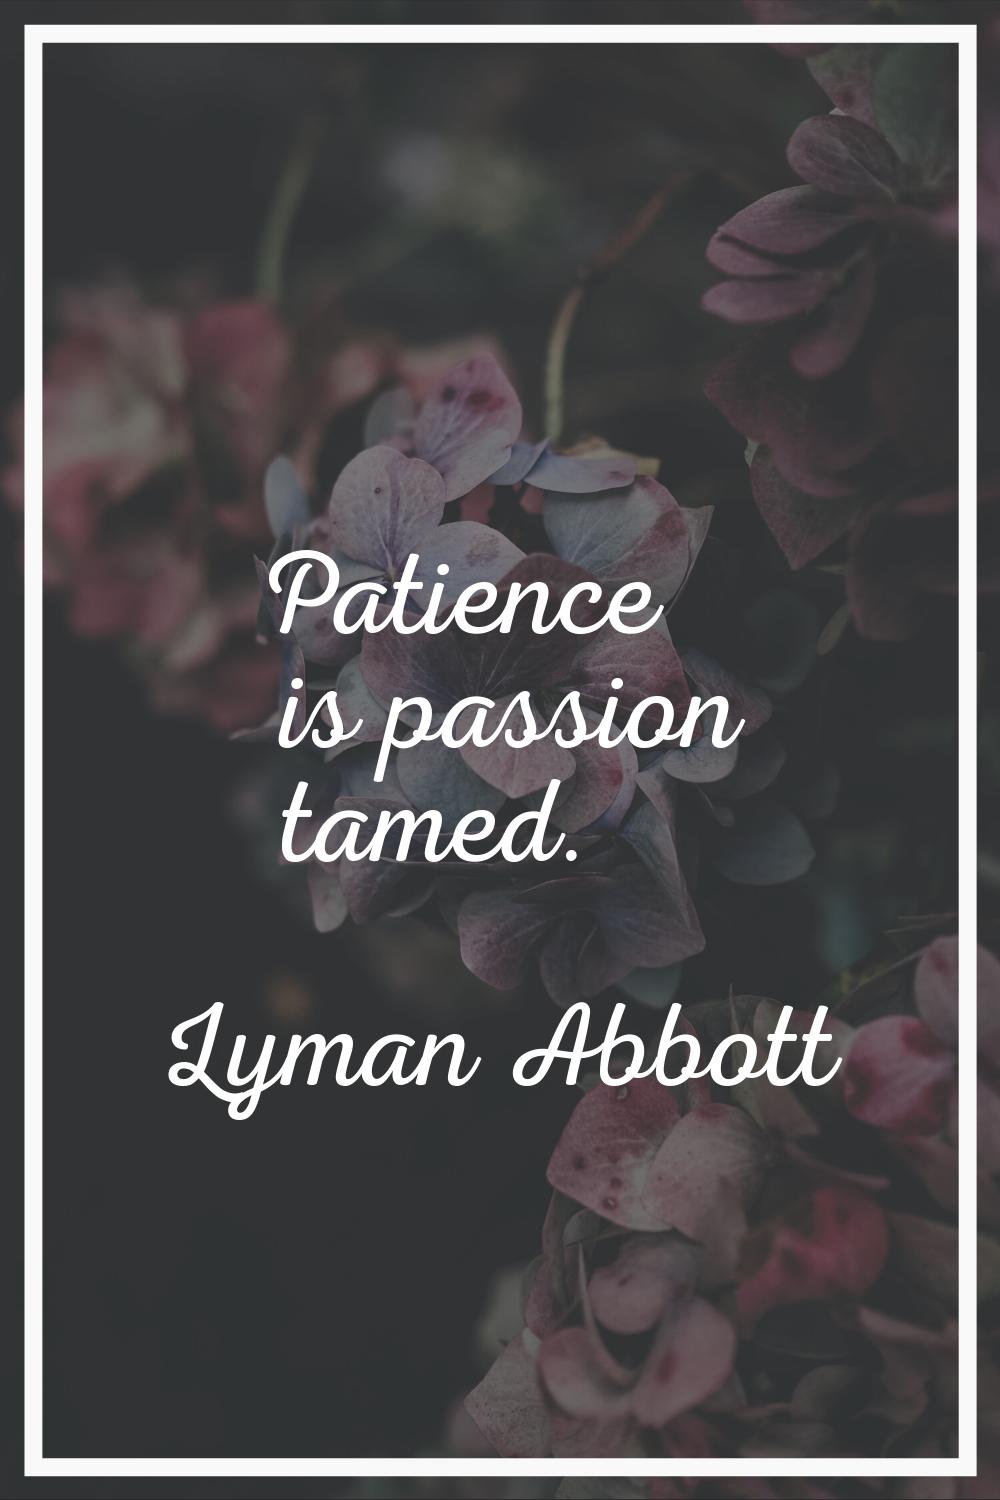 Patience is passion tamed.